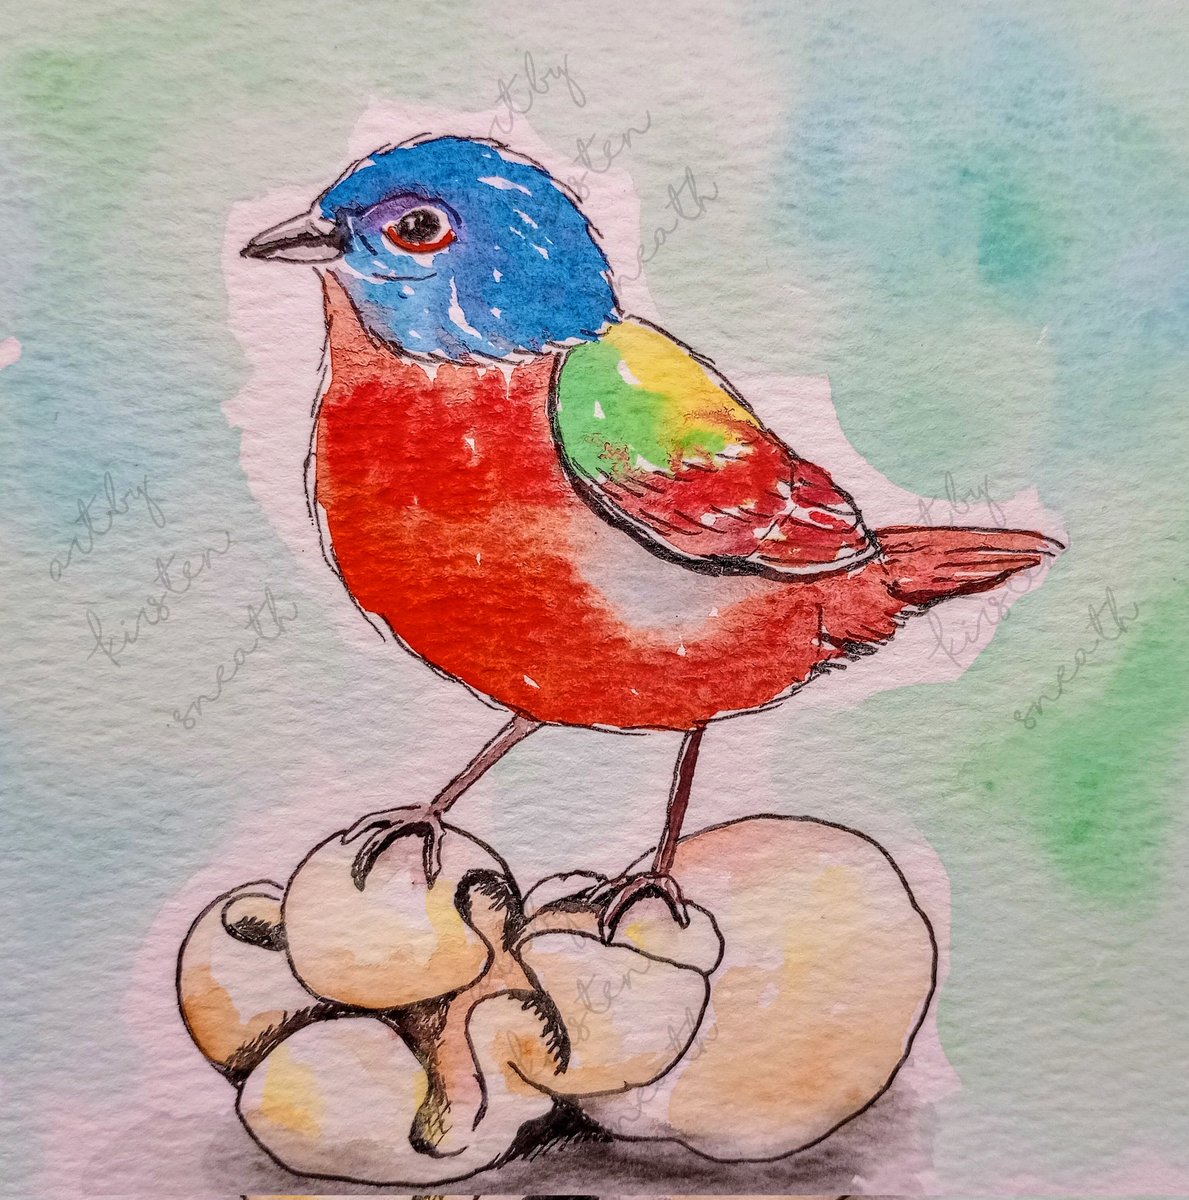 Happy #AnimalAlphabets Monday! This week's word is Popcorn 🍿 so here is my Painted Bunting atop a rather plump piece! Hope you have a great week! @AnimalAlphabets #paintedbunting #popcorn #weeklyartchallenge #birdpainting